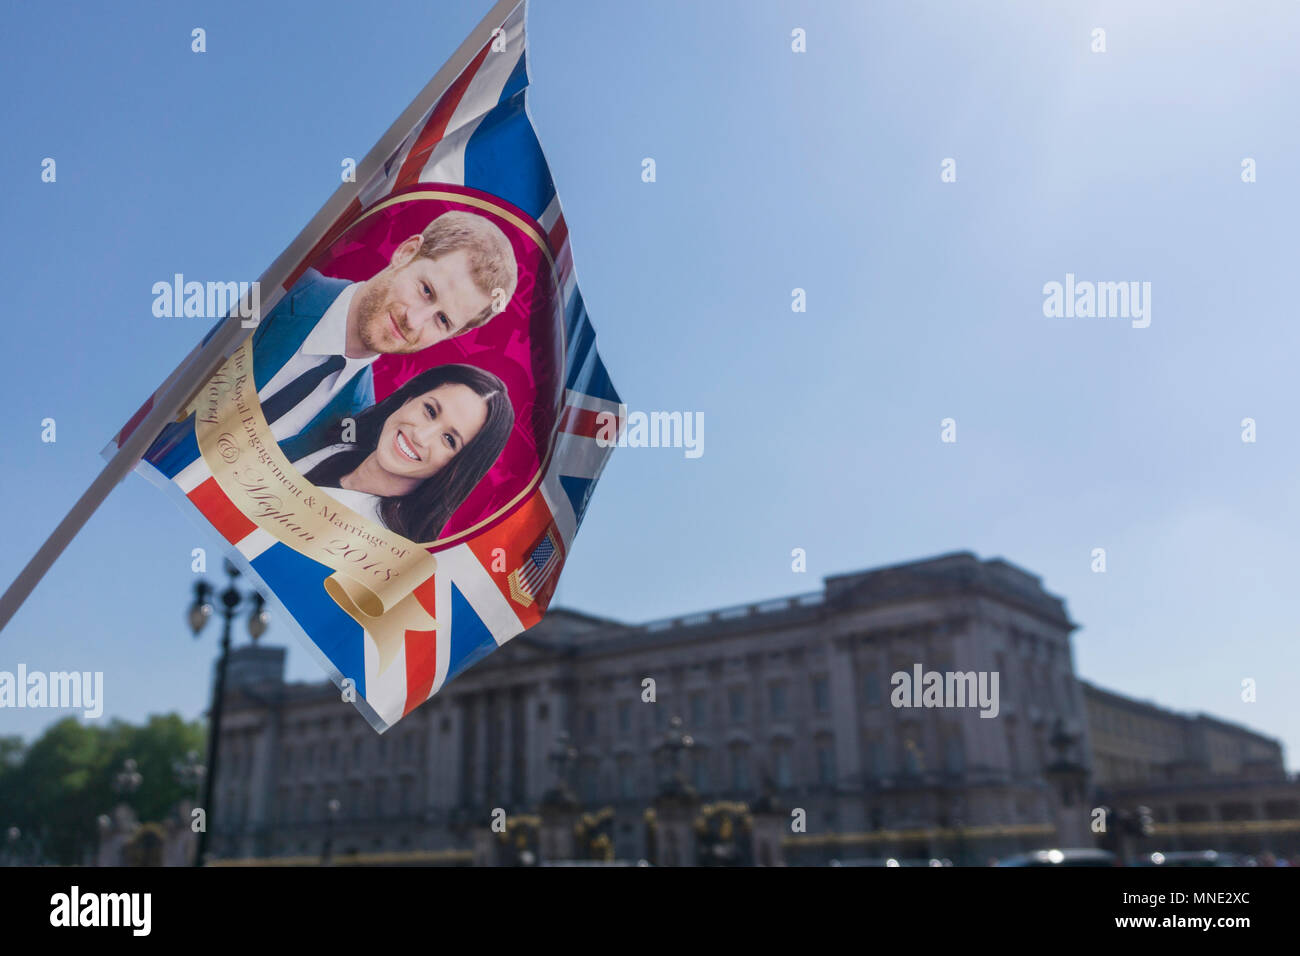 London, UK. 15th May 2018. Union jack flag with Prince Harry and Meghan Markle on is waved outside Buckingham palace before the Royal Wedding takes place in Windsor Credit: Ink Drop/Alamy Live News Stock Photo